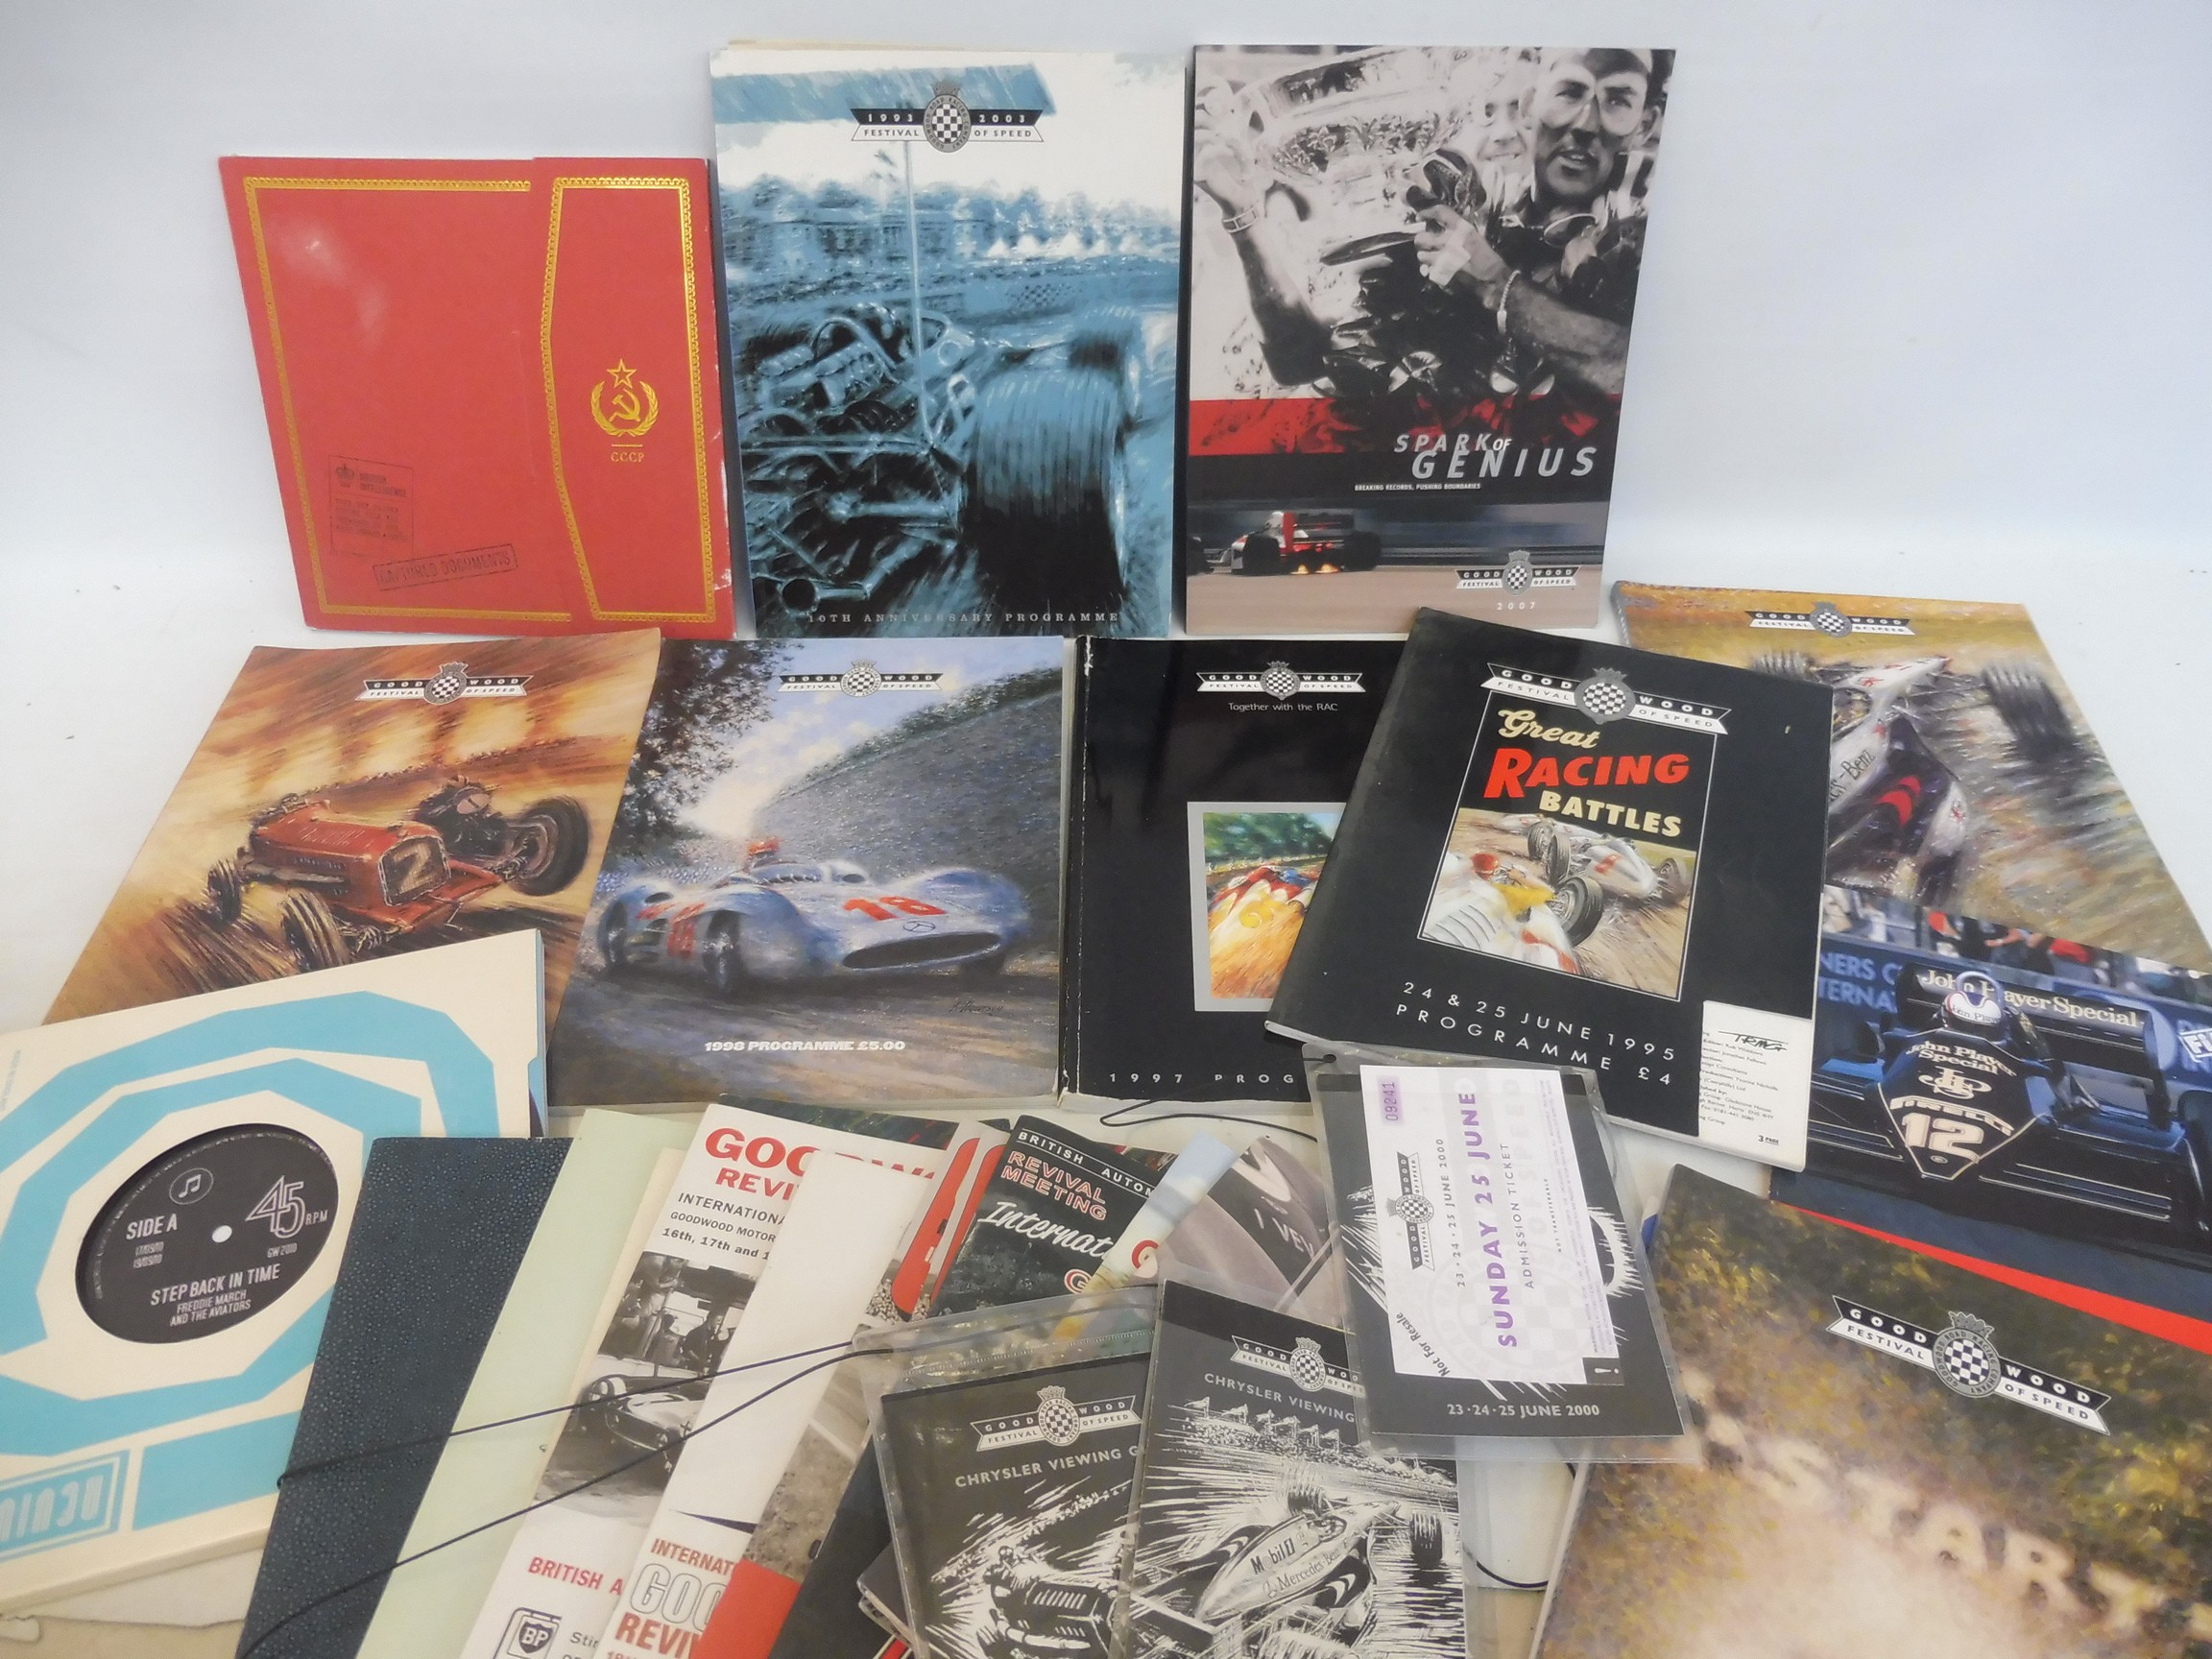 A box of assorted Goodwood related memorabilia and ephemera including tickets and programmes.